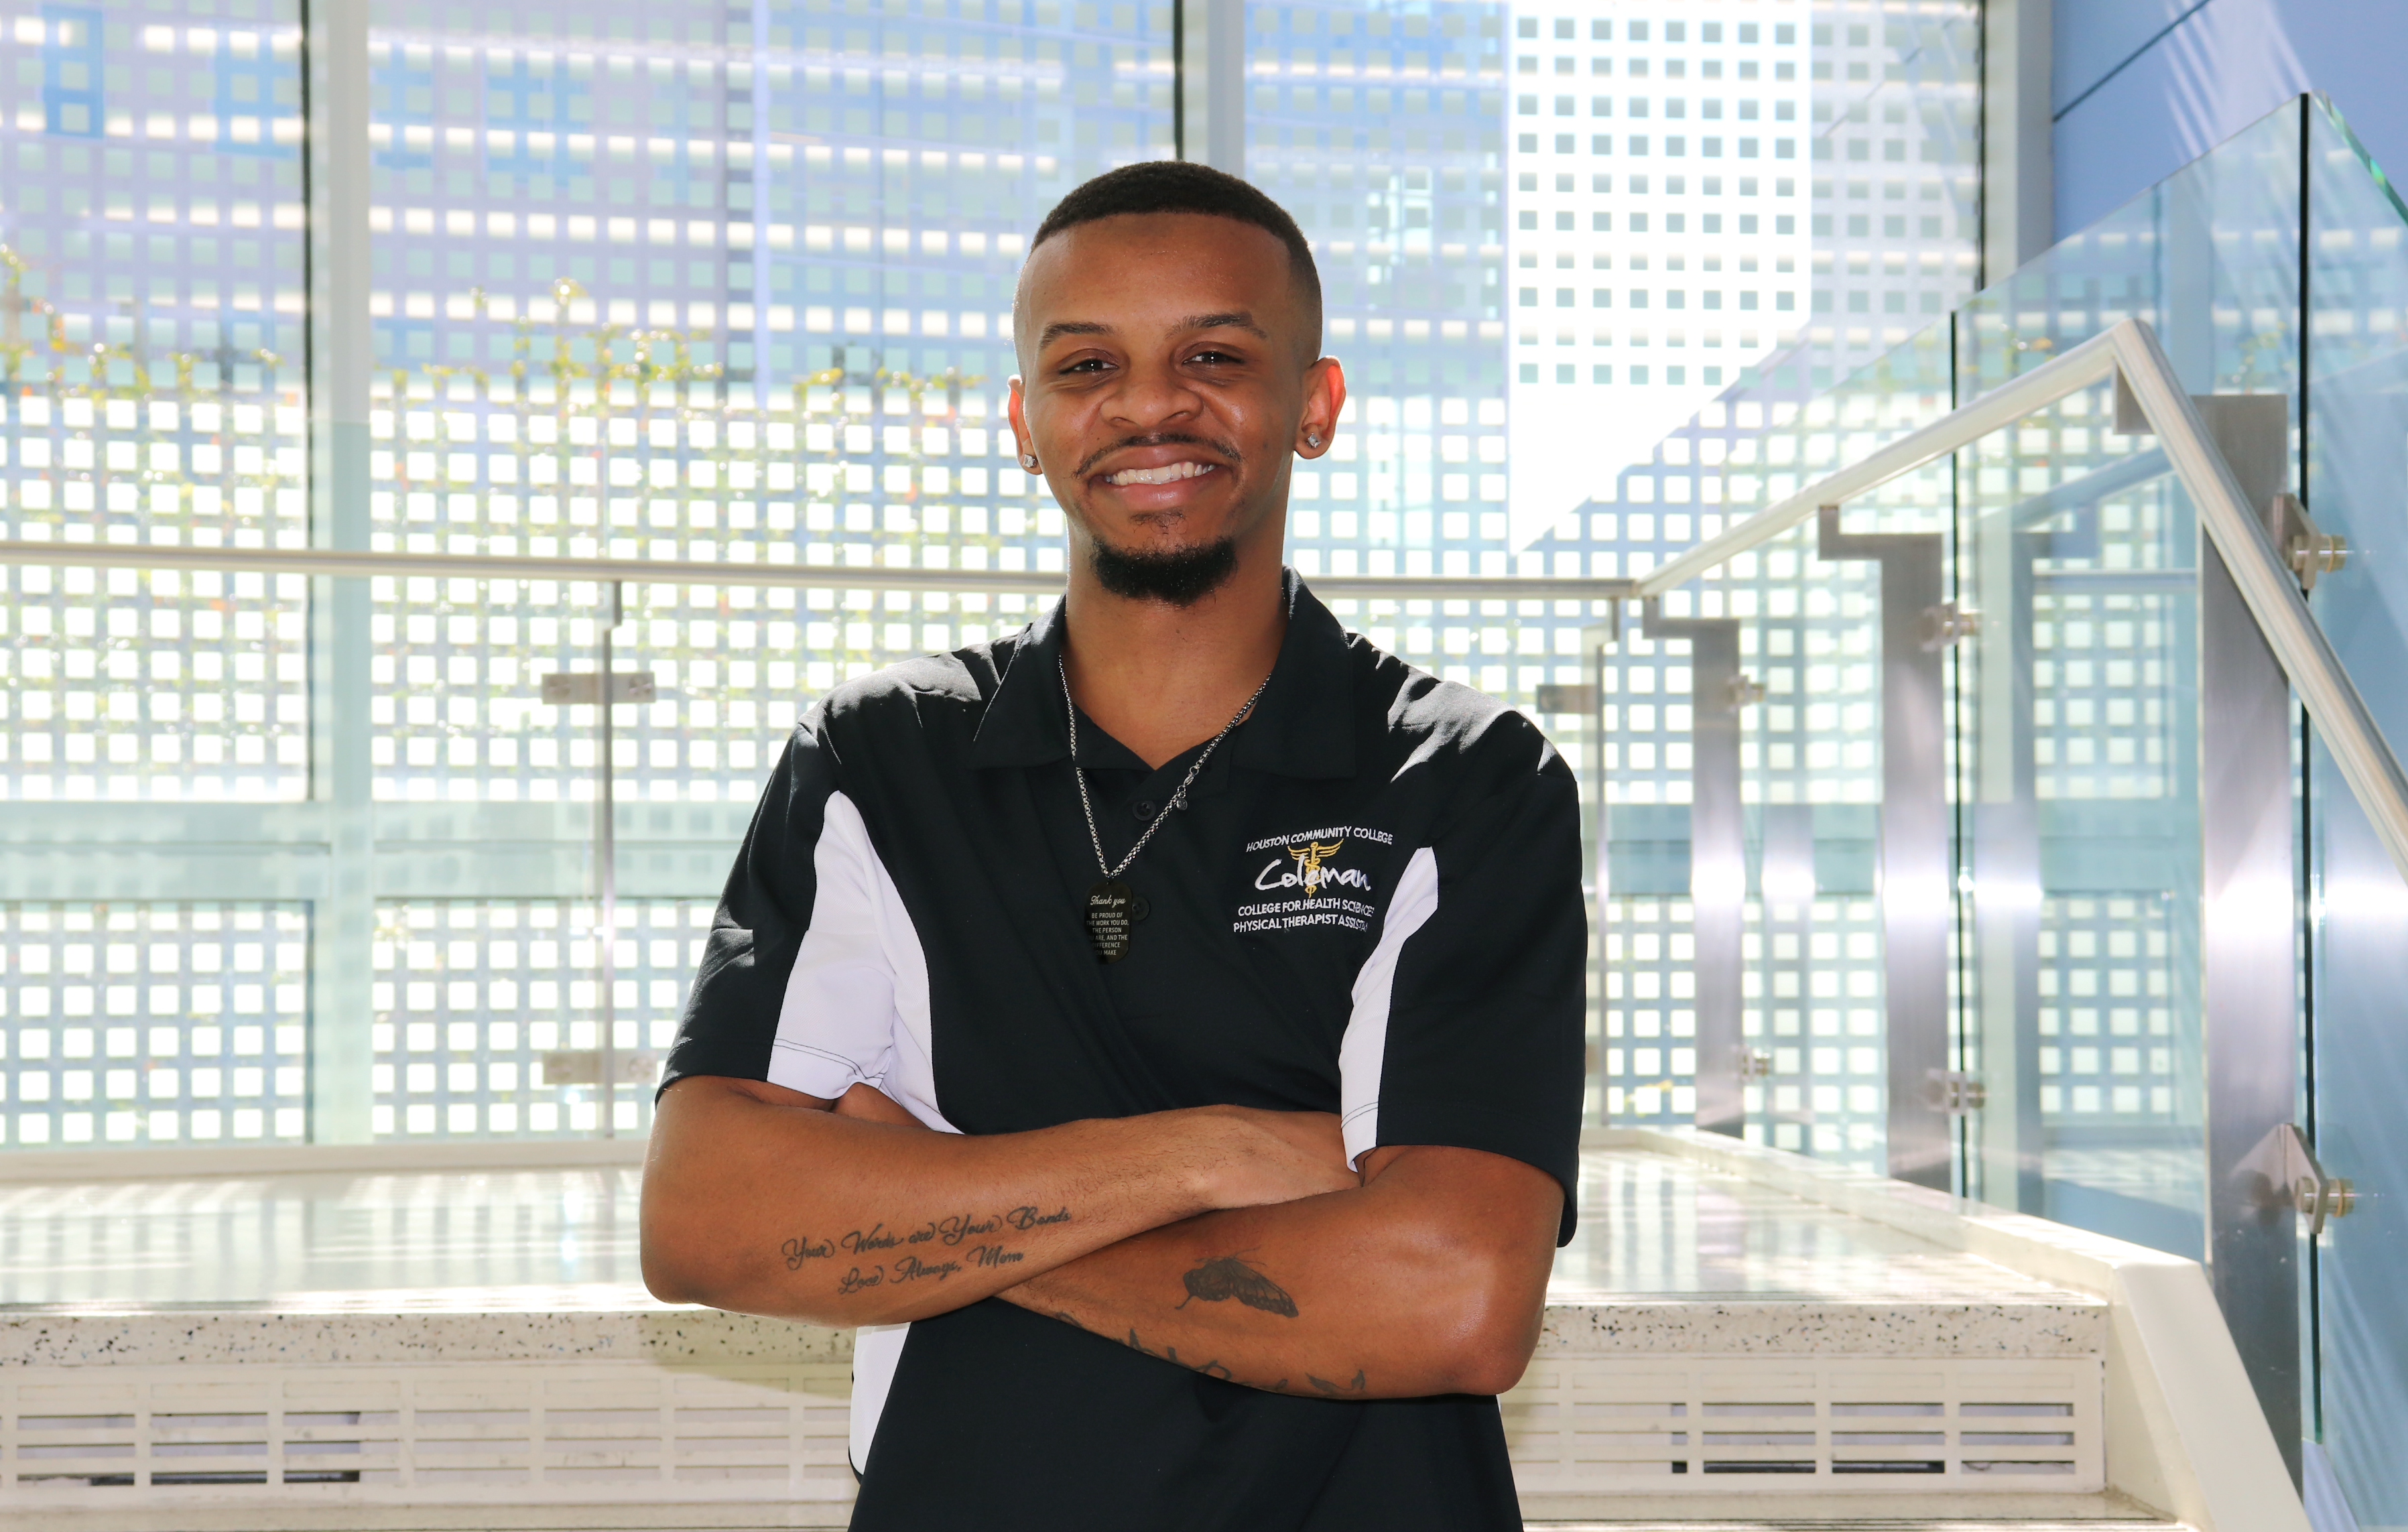 Physical Therapy Assistant student AJ Spruill